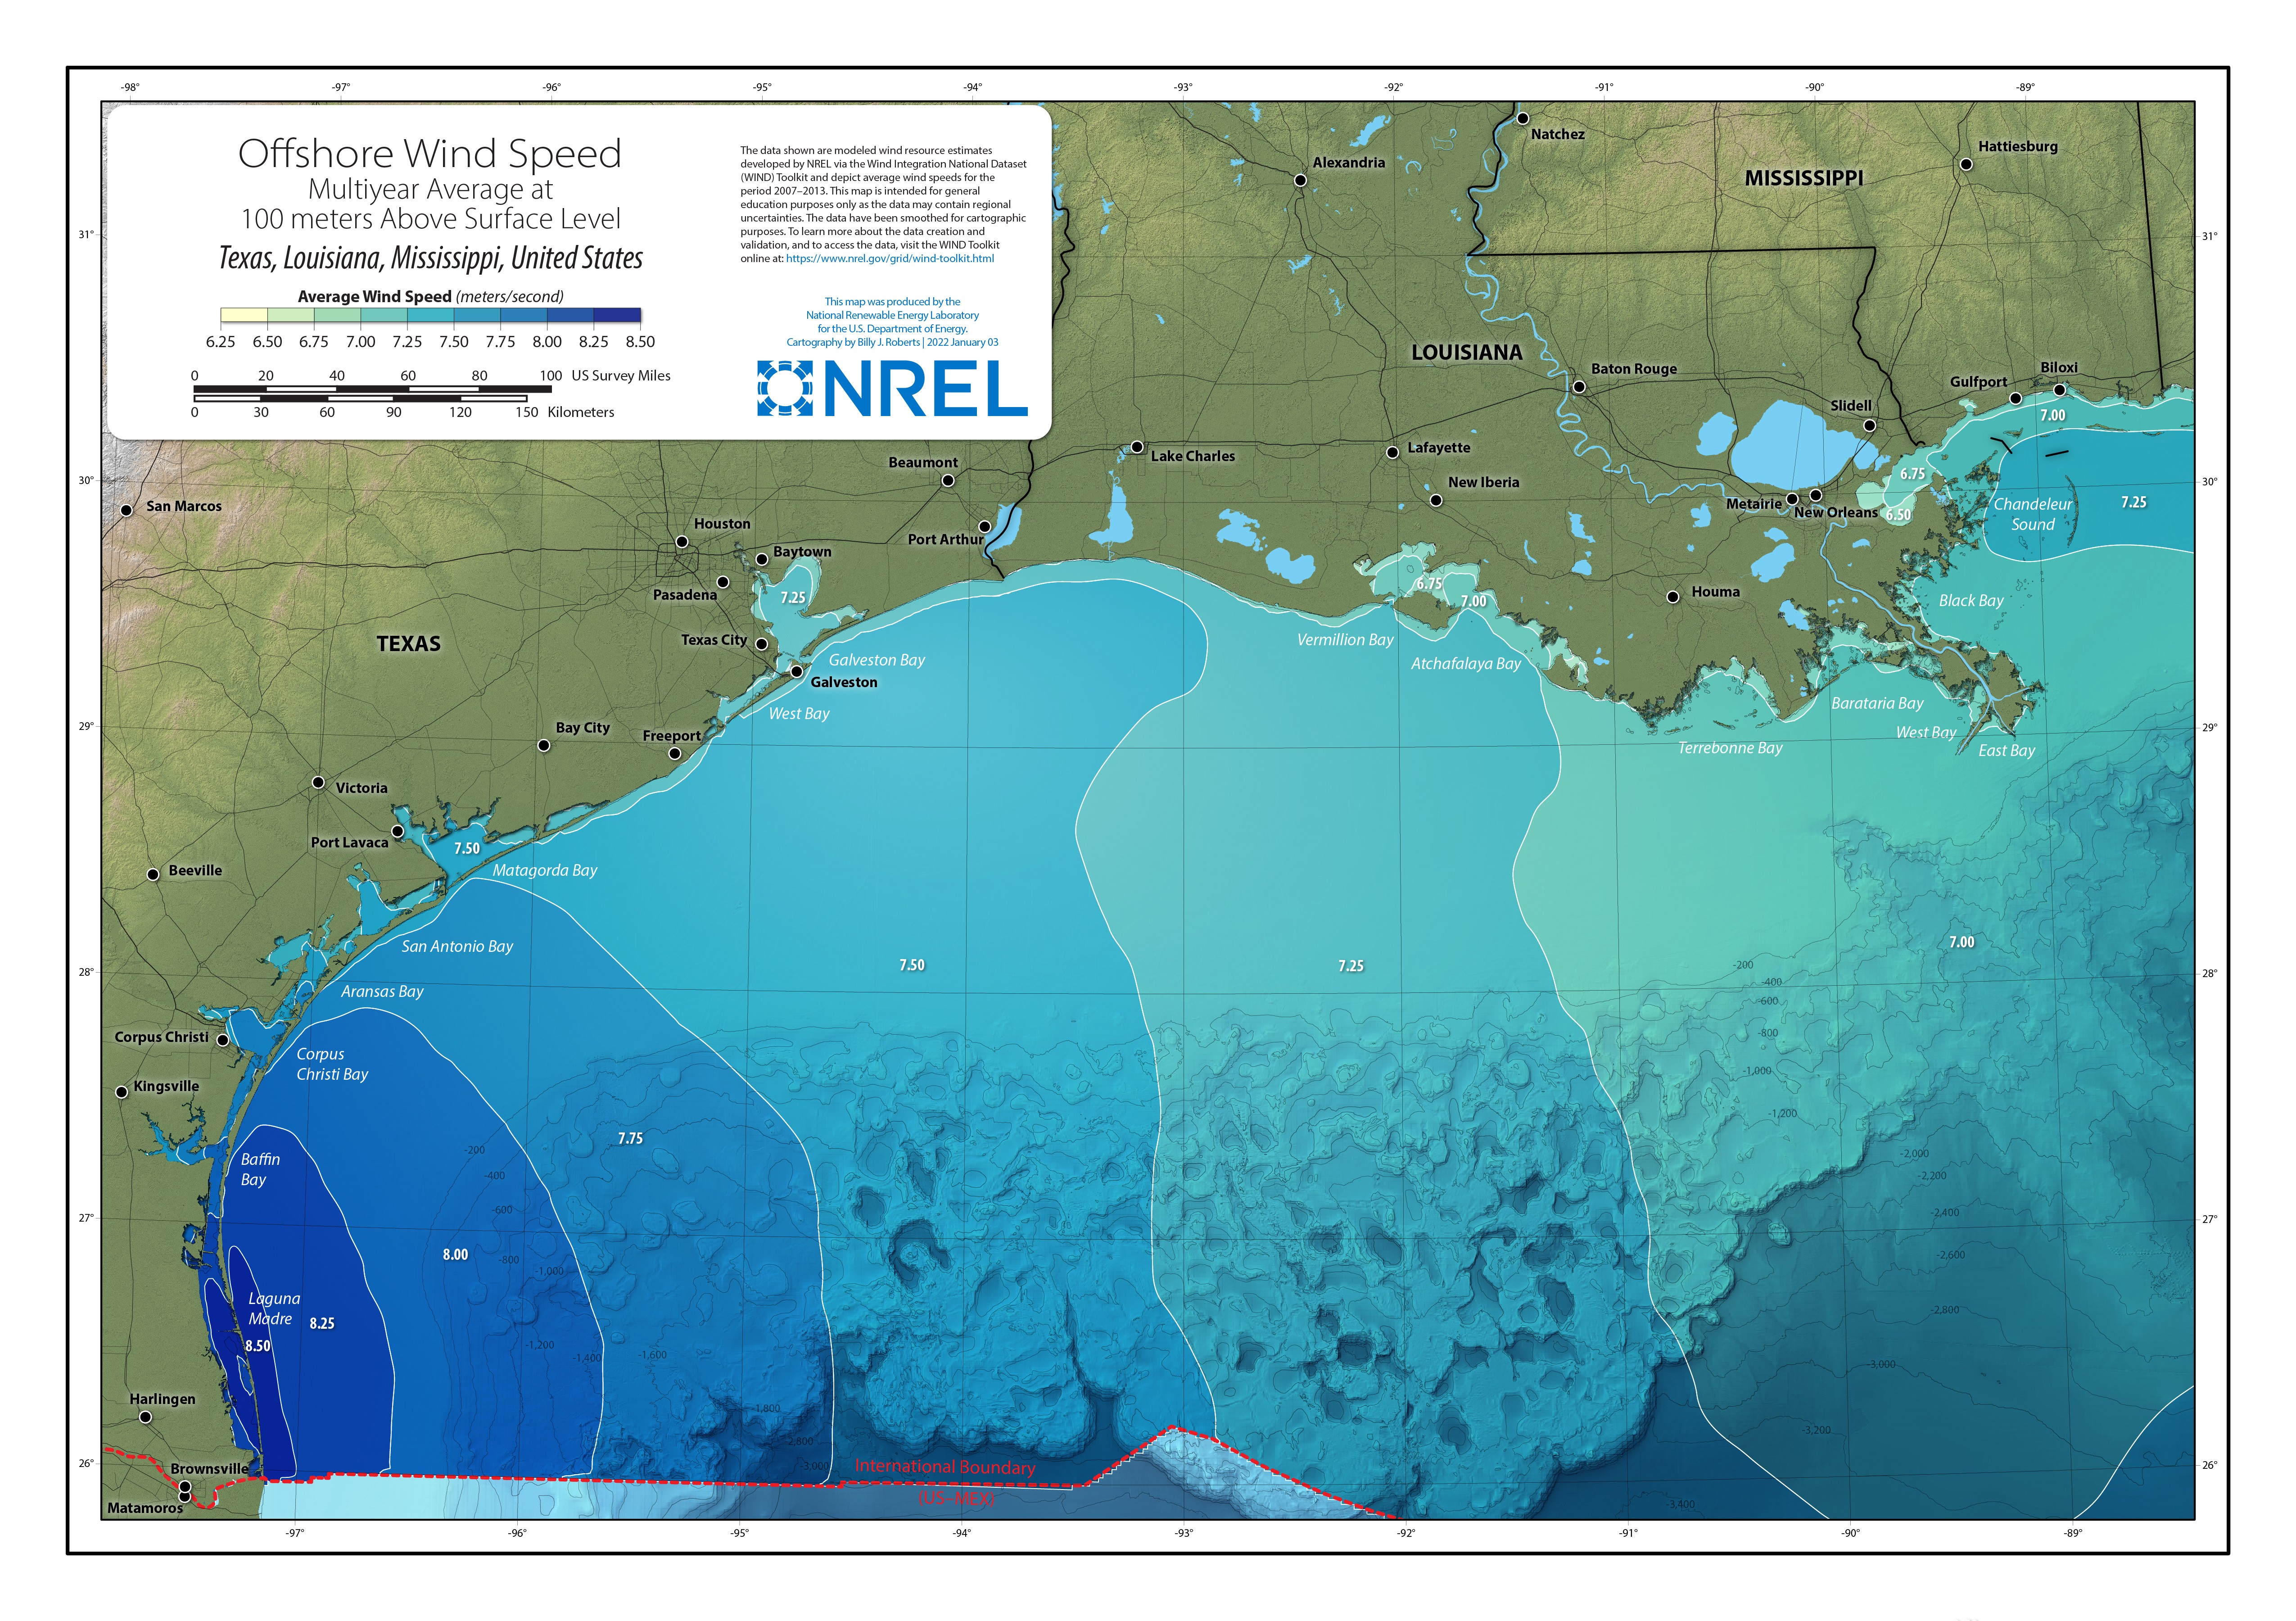 Texas-Louisiana-Mississippi Offshore Wind Speed at 100 Meters